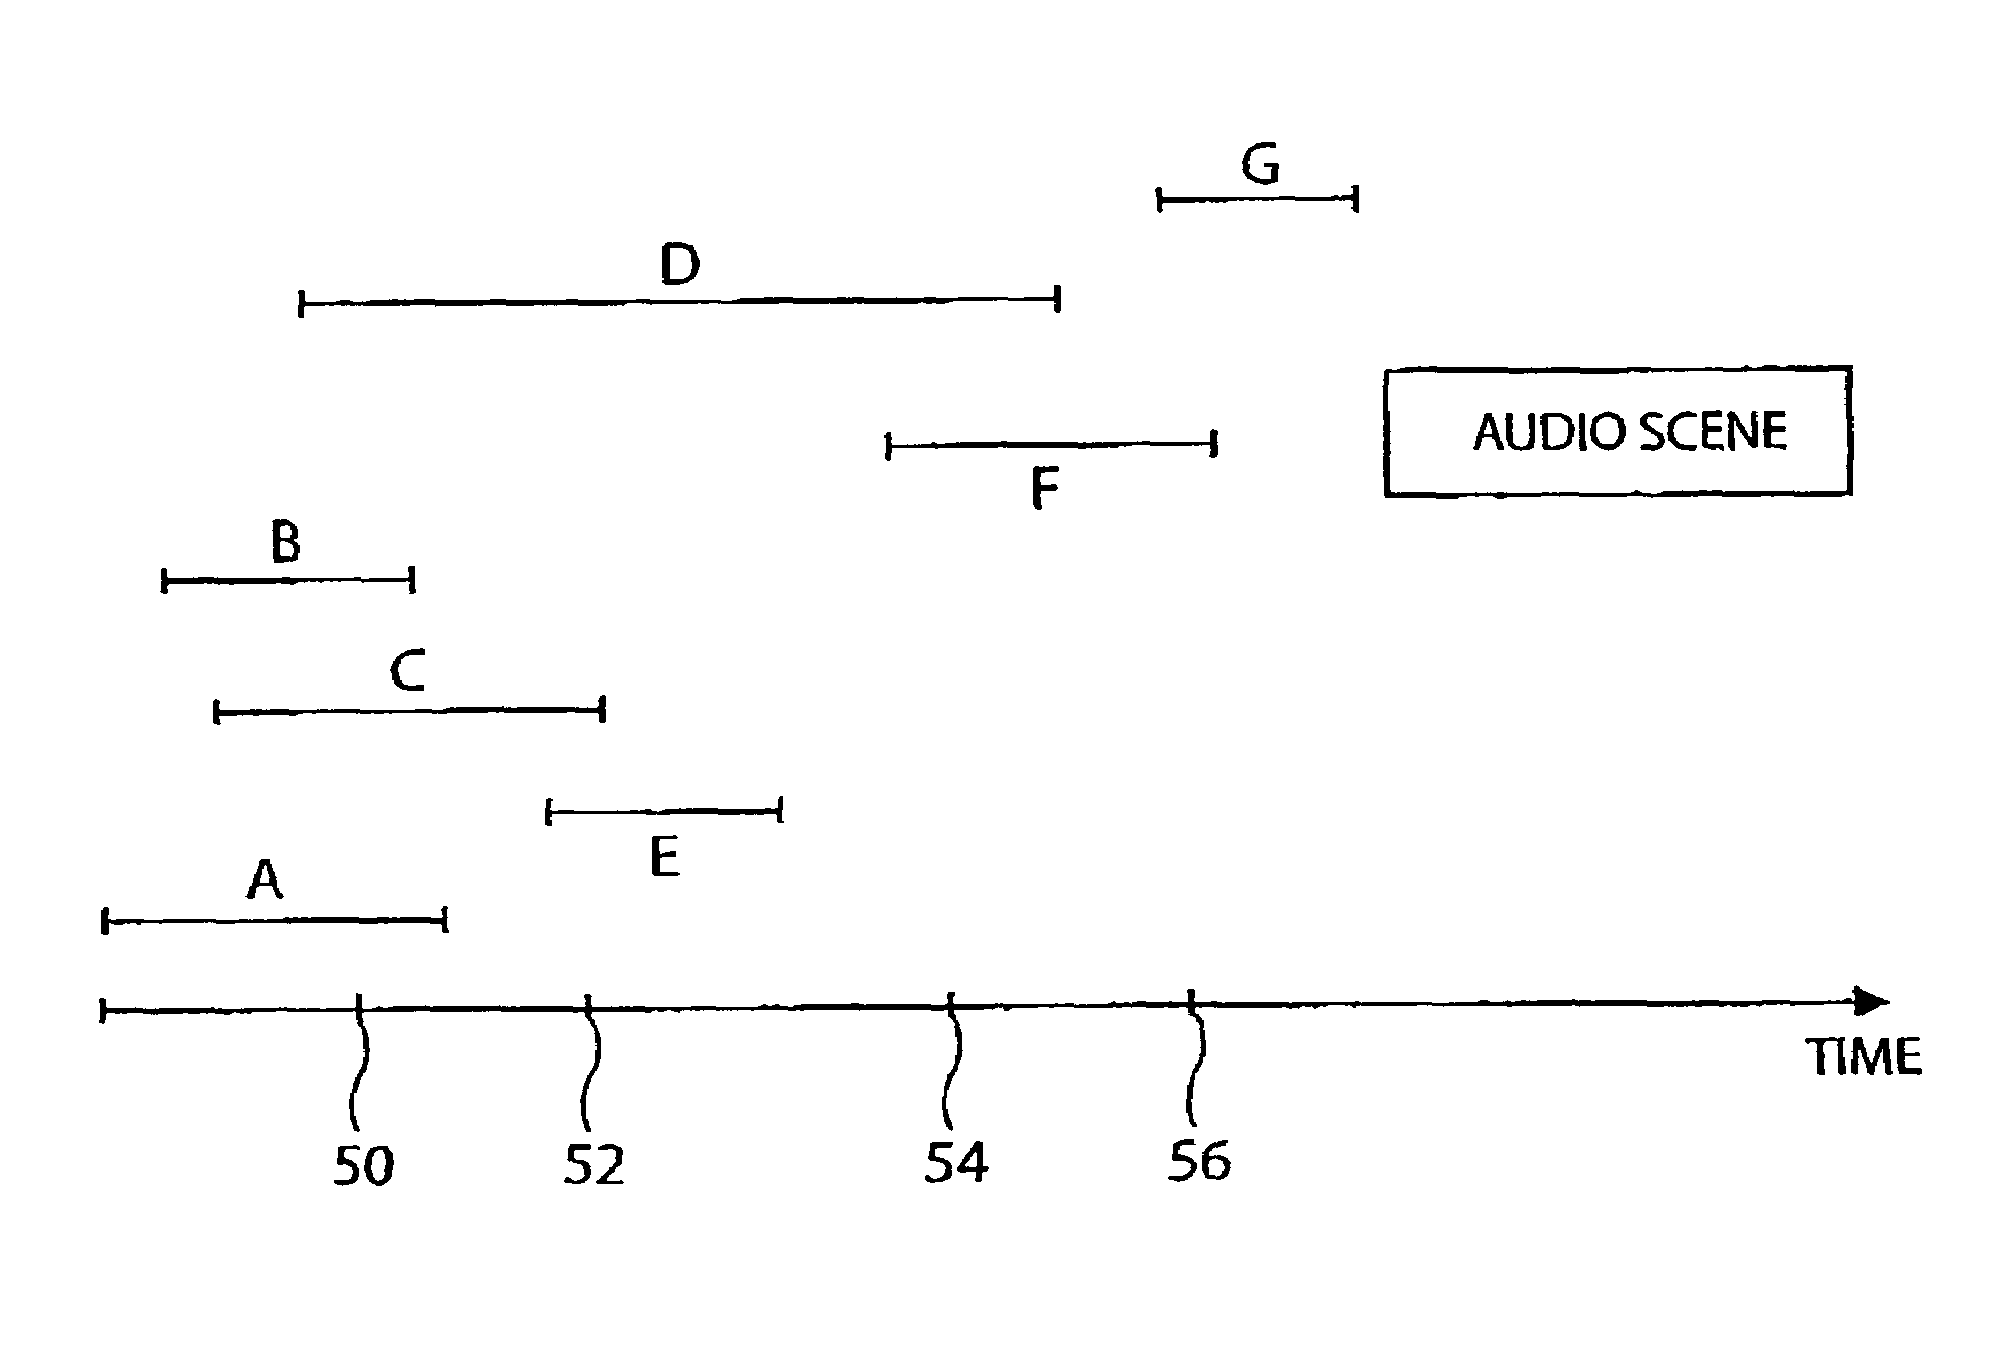 Apparatus and method for generating, storing, or editing an audio representation of an audio scene